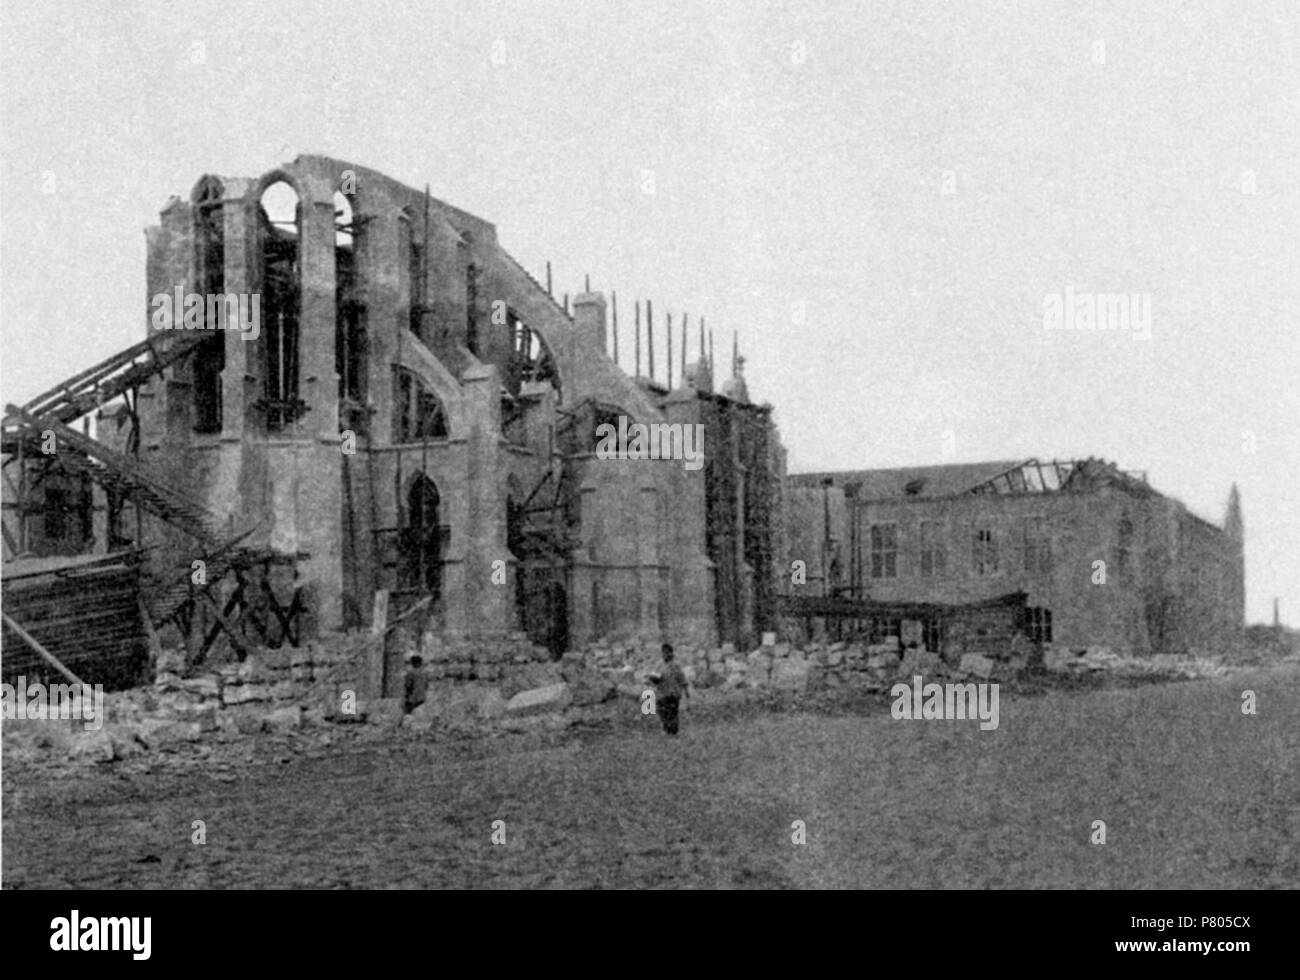 English: Church of the Blessed Virgin Mary's Immaculate Conception under construction. Baku. 1911 91 Church of the Blessed Virgin Mary's Immaculate Conception under construction Stock Photo